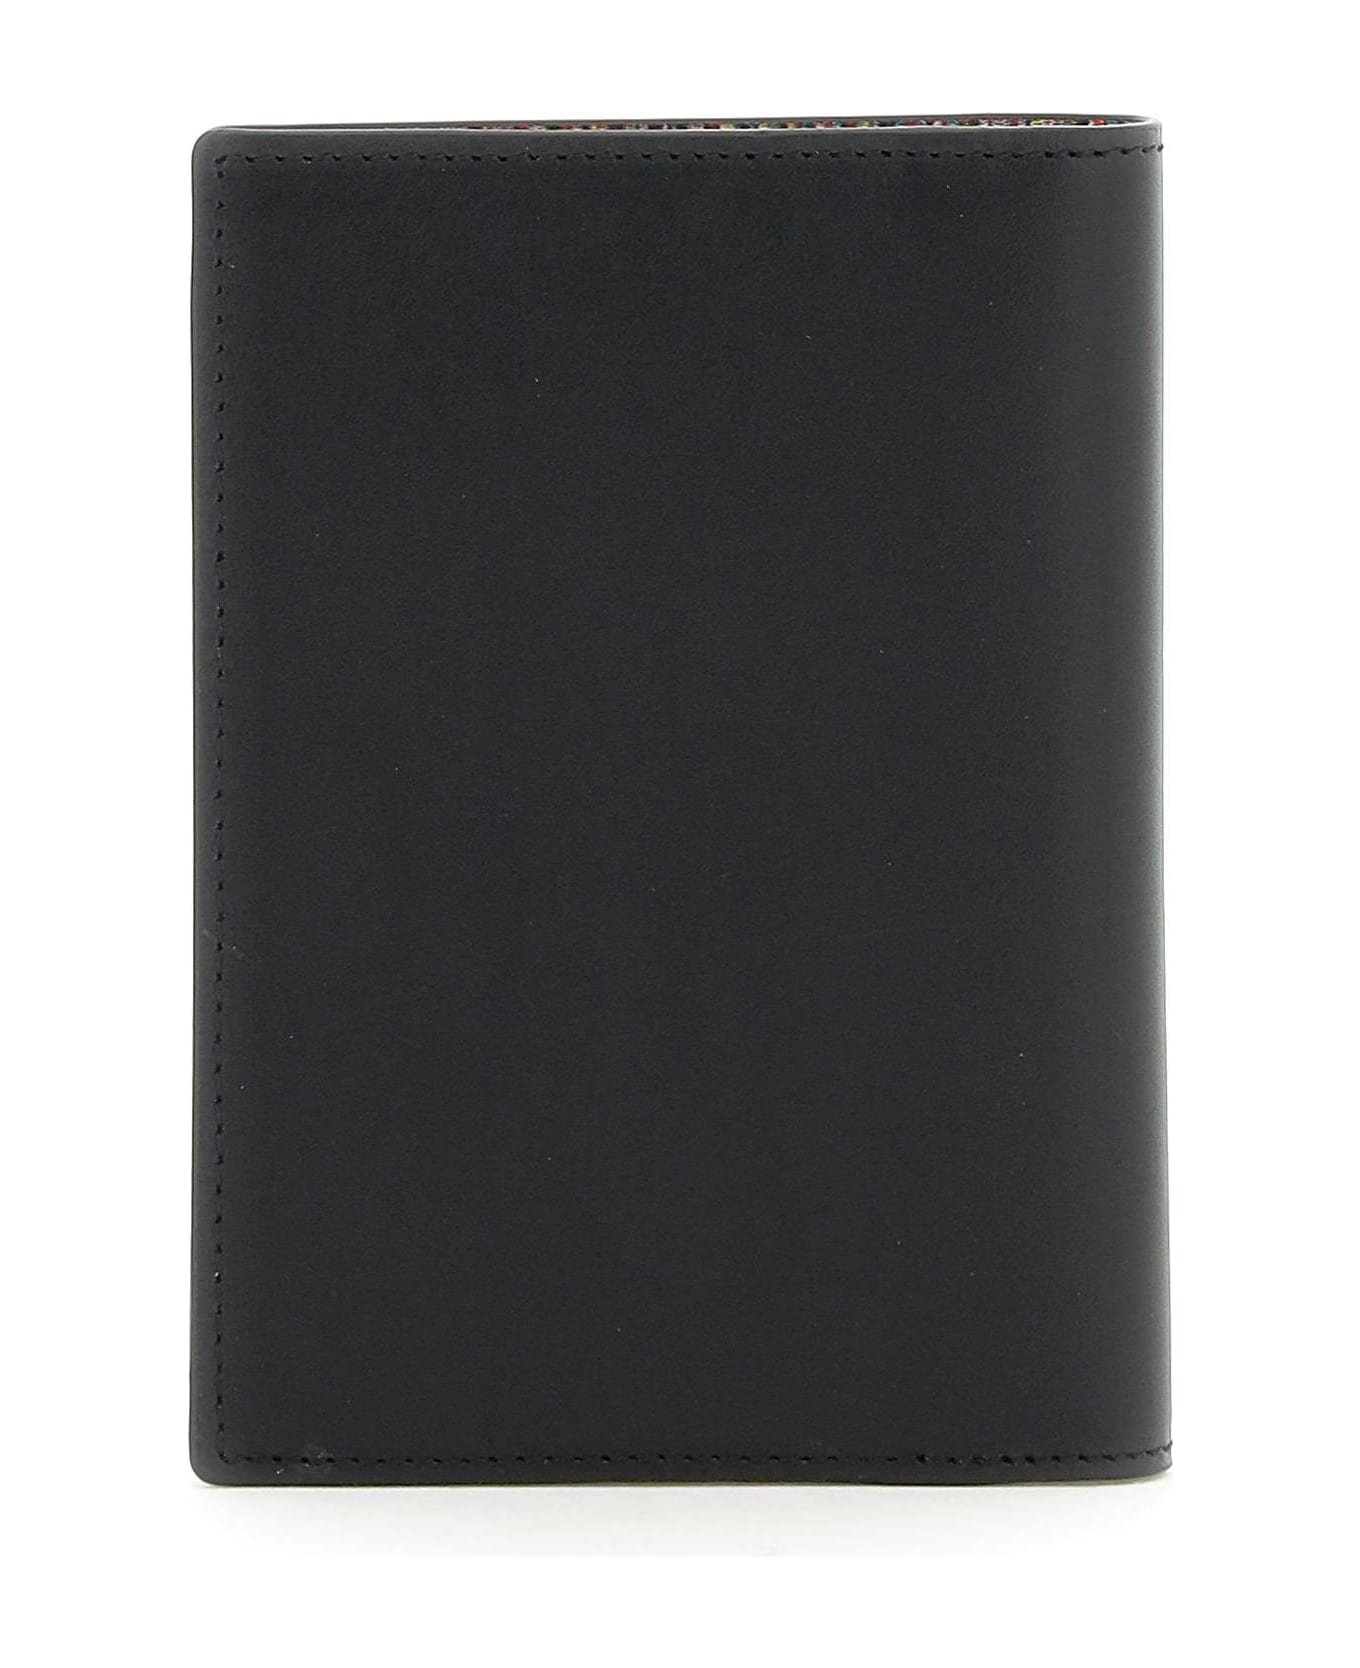 Paul Smith Leather Passport Cover - Black